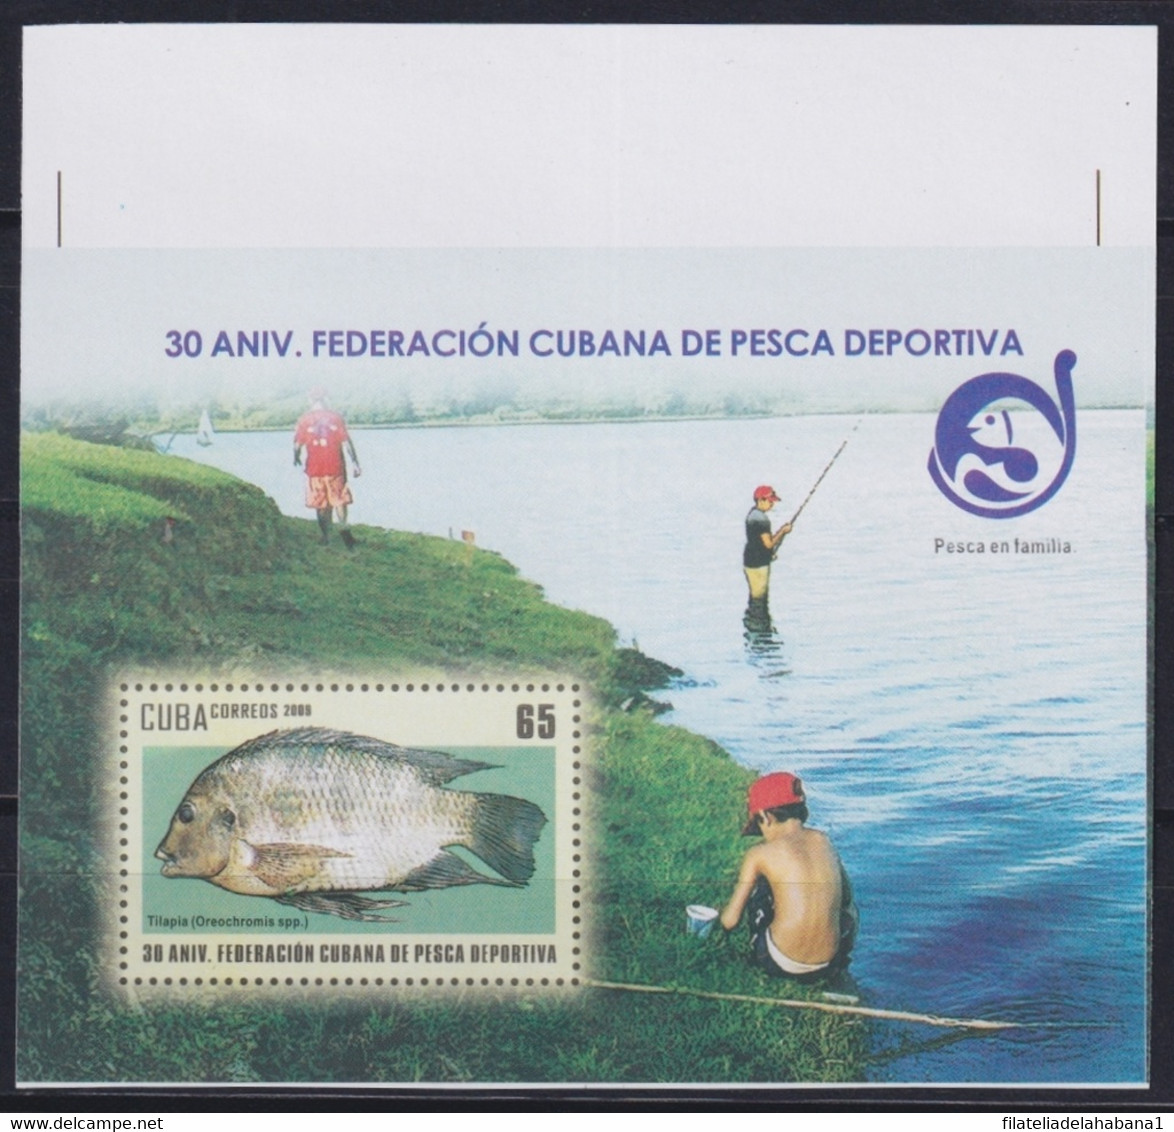 2009.427 CUBA MNH 2009 IMPERFORATED PROOF UNCUT SPORTING FISHING FISH PECES. - Imperforates, Proofs & Errors